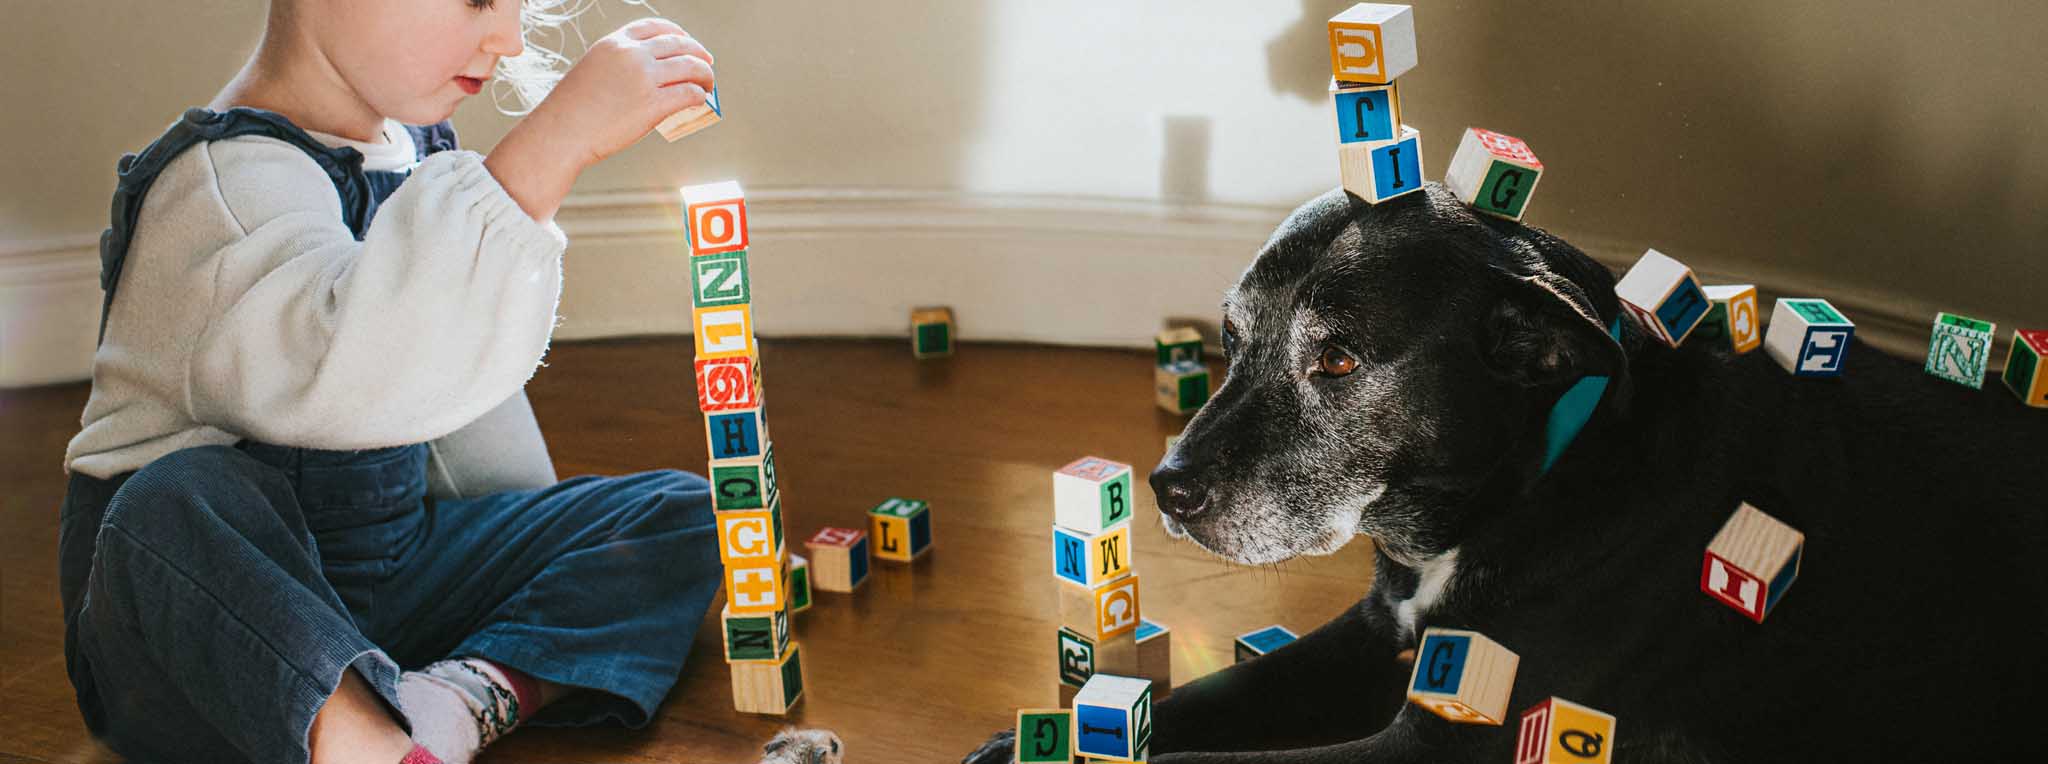 Child and dog with building blocks